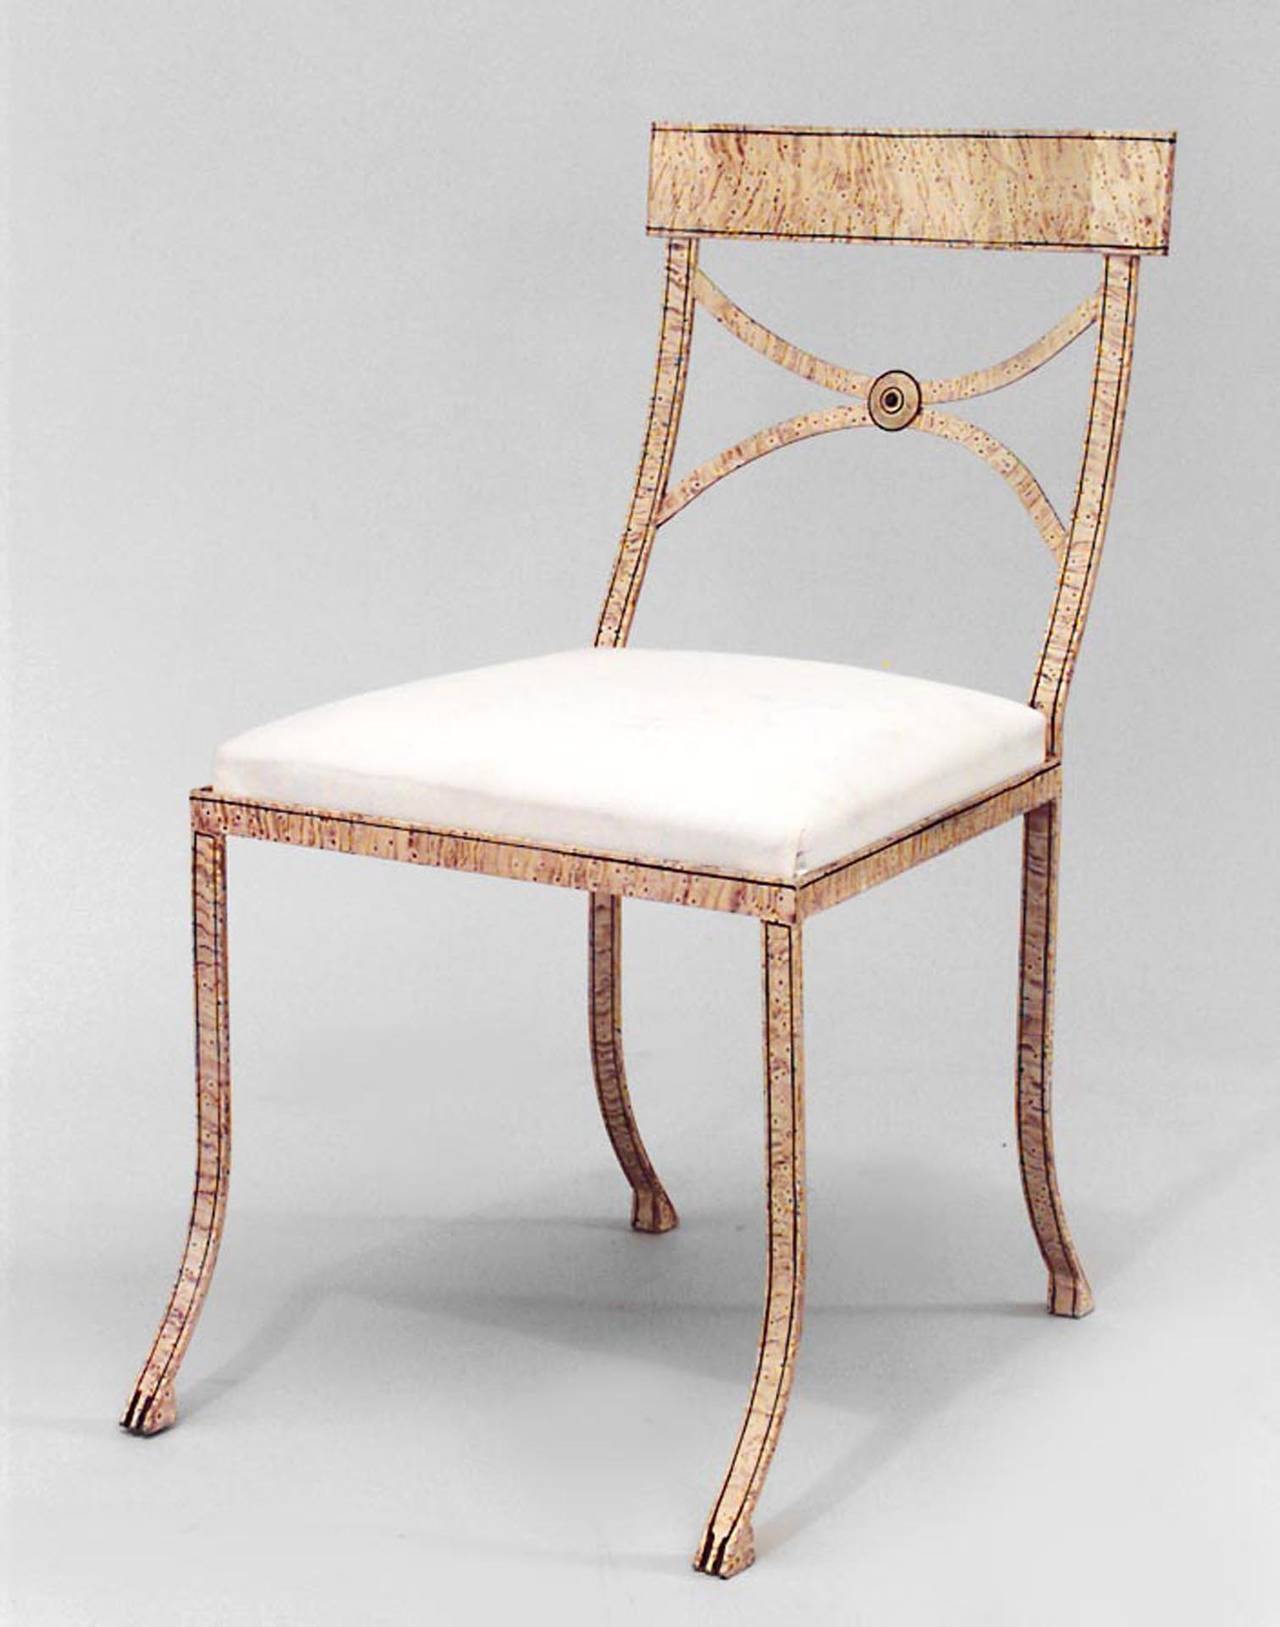 Twentieth century English Regency style faux maple painted iron side chair with open design backs and slip seats.

